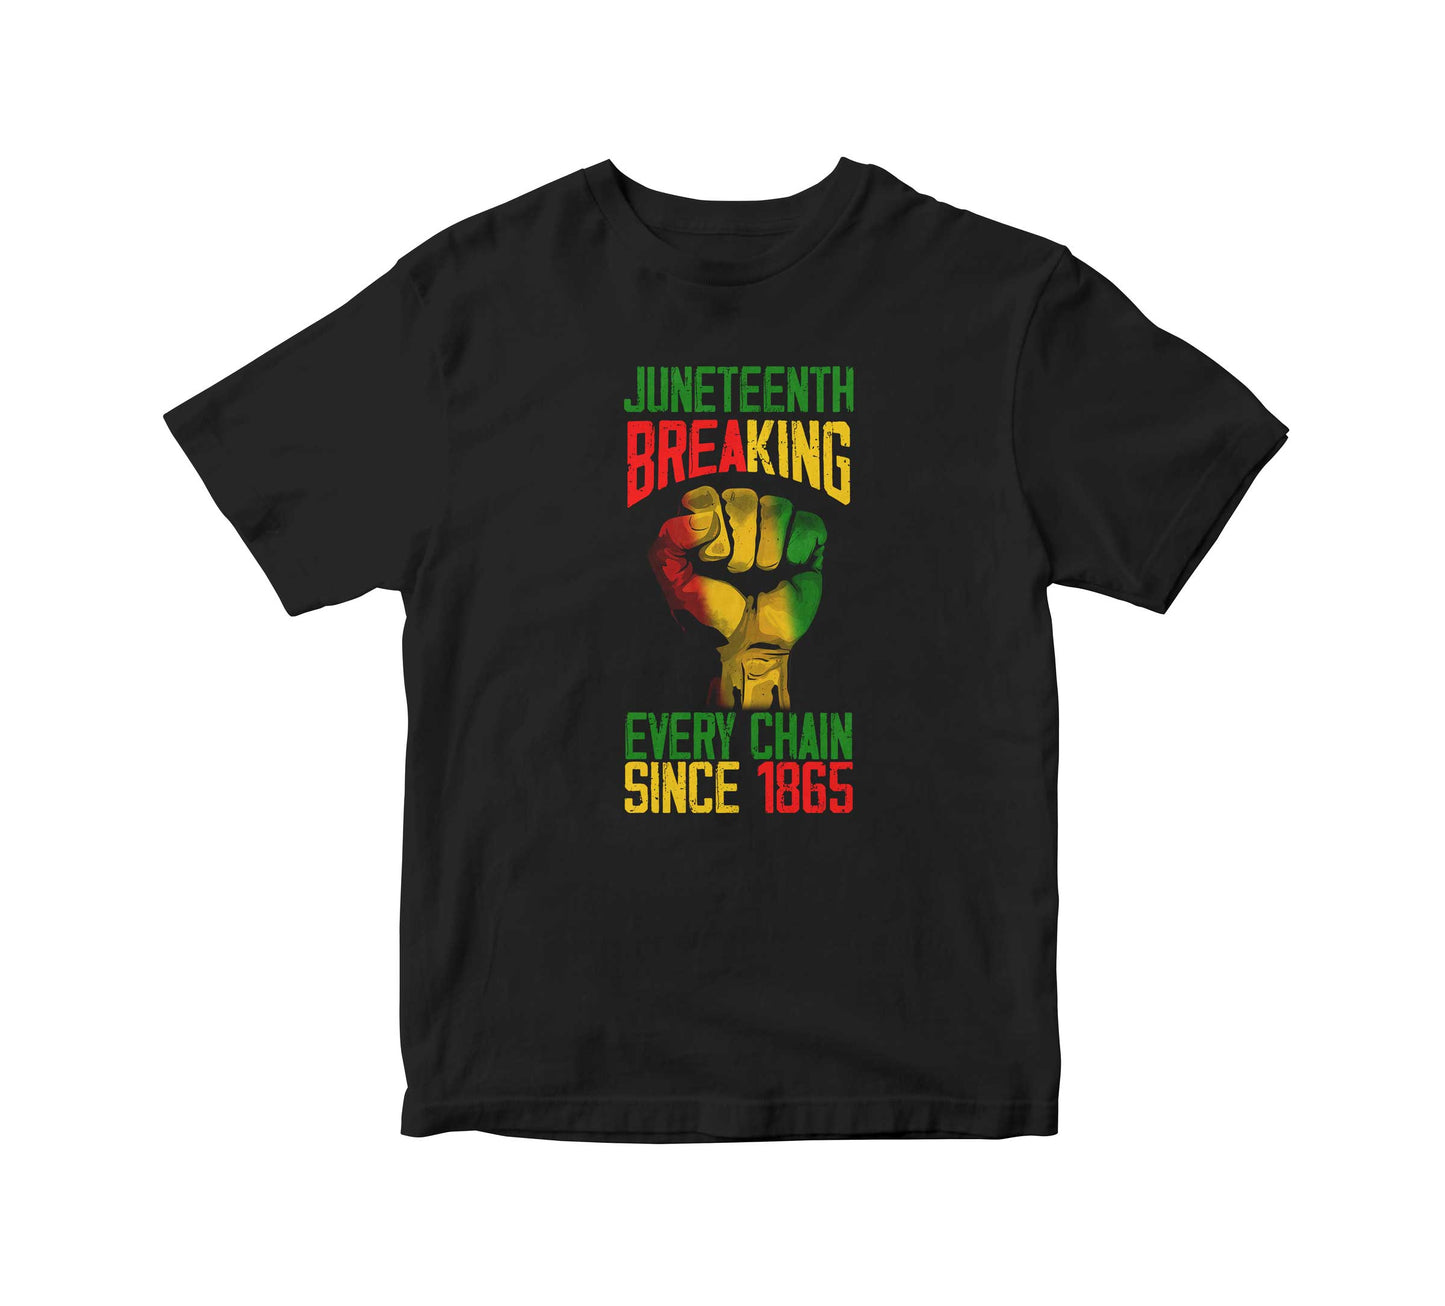 Juneteenth Breaking Every Chain Adult Unisex T-Shirt